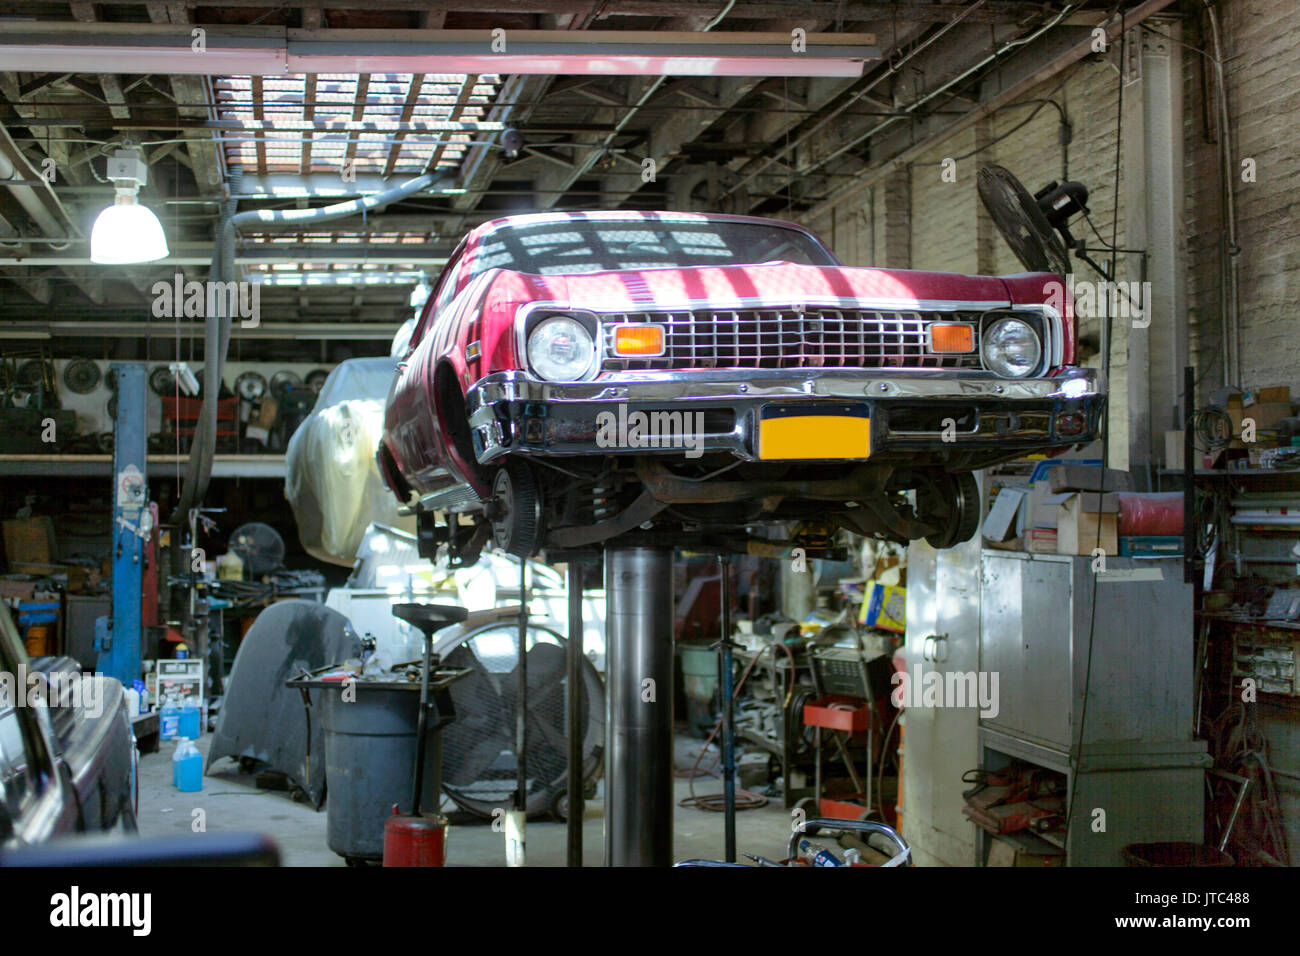 A classic vintage American car on the lift waiting to be repaired Stock Photo